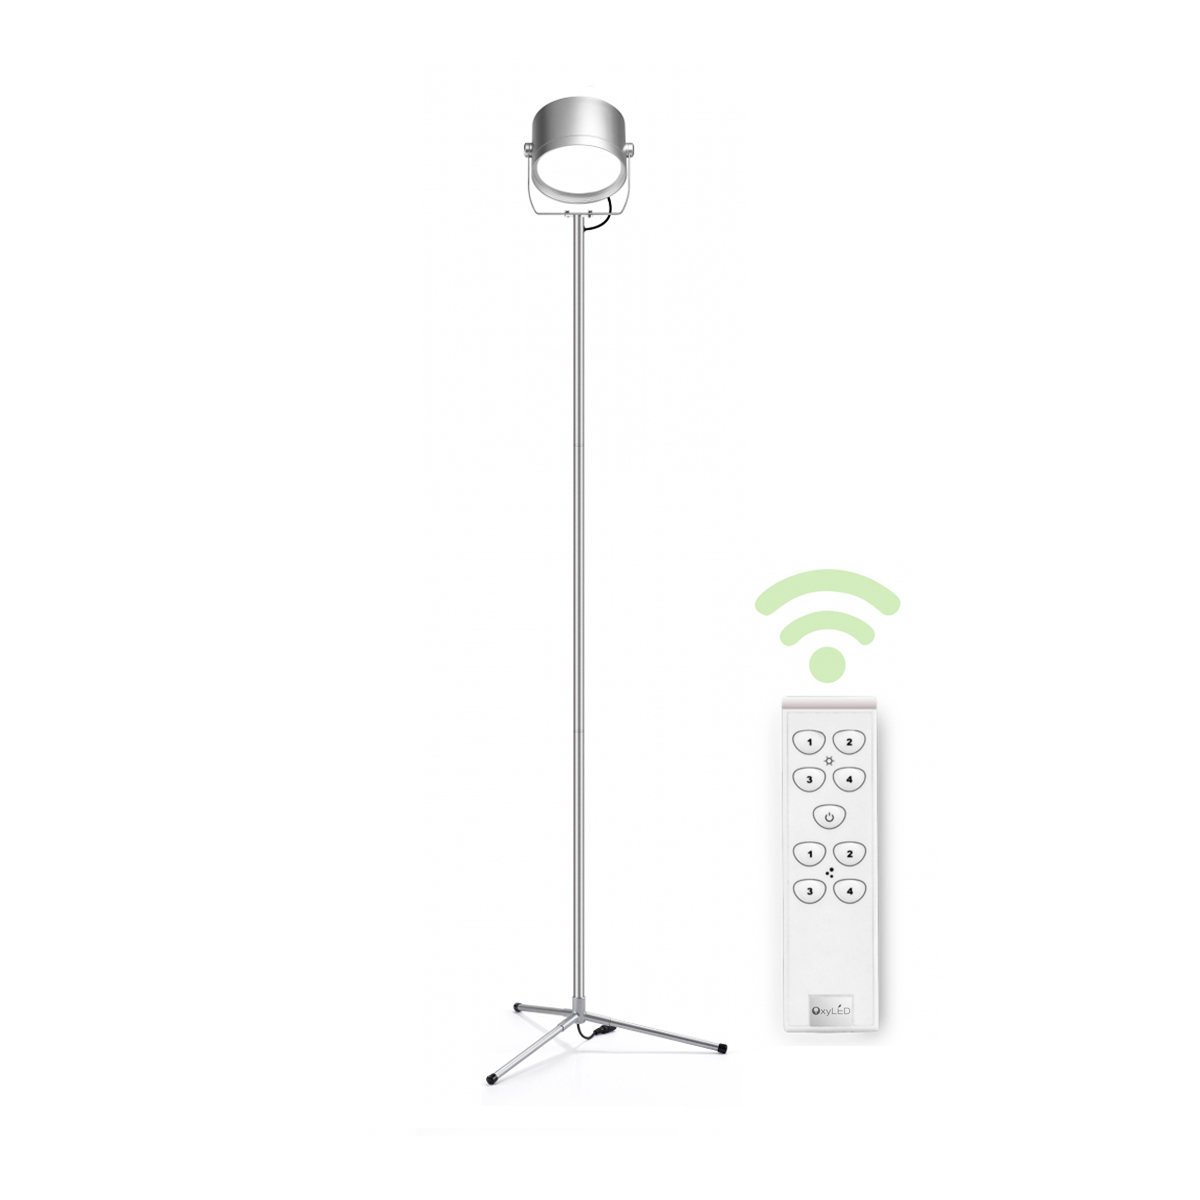 Oxyled Led Floor Lamps Led Floor Light Dimmable Lamp With Remote Control 700 Lumens 8 Brightness Levels For Living Roombedroomsilver regarding proportions 1200 X 1200